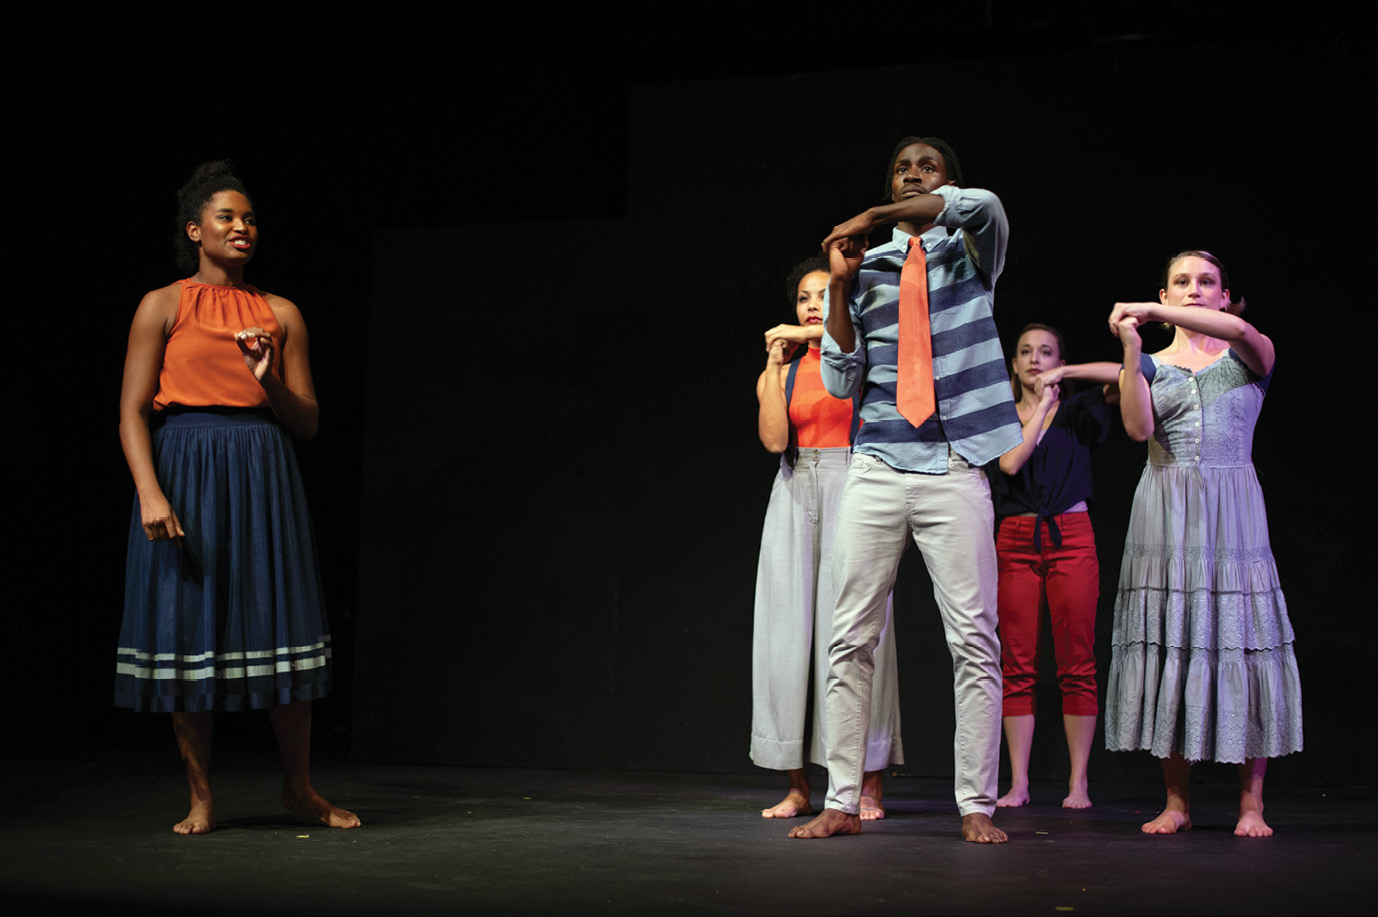 Beyond the Page: Free Verse, the brainchild of Charleston’s poet laureate Marcus Amaker, frees verse—literally—bringing poetry to life through movement (as pictured above in the 2019 Coming to Monuments collaboration with Dance Matters) as well as through spoken word and public art events. The month-long festival incorporates a social justice lens in much of its creativity-inspiring programming.